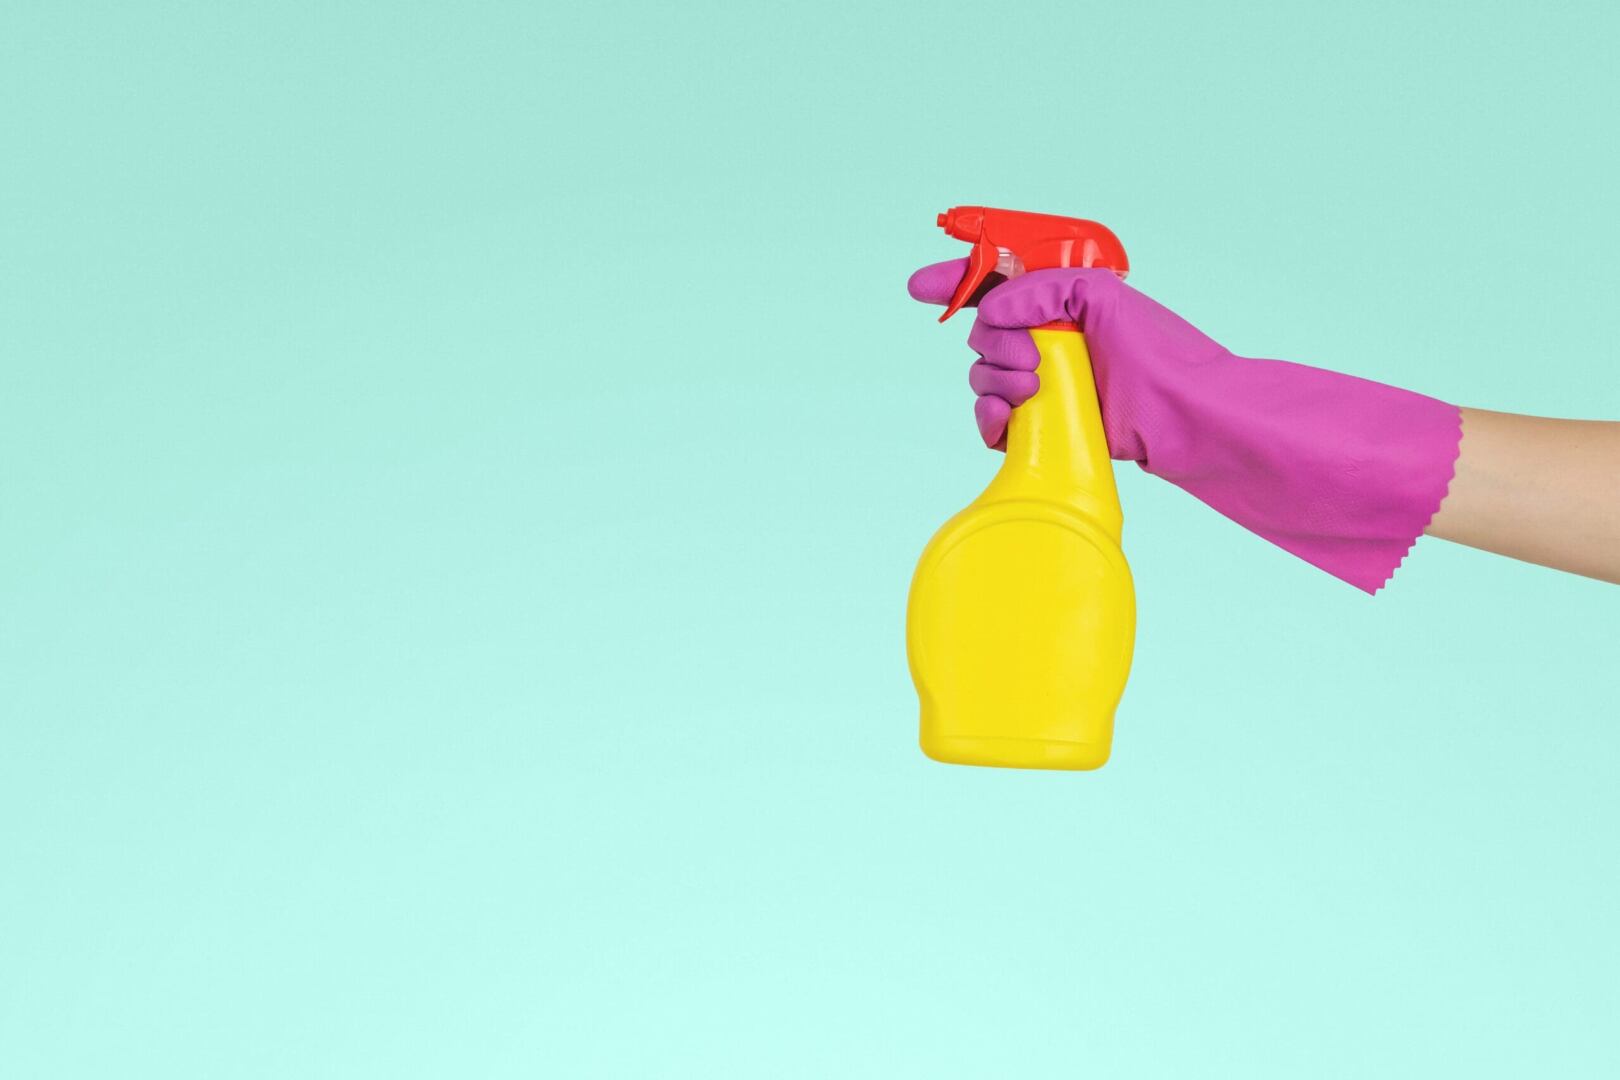 glove hand and cleaning spray bottle